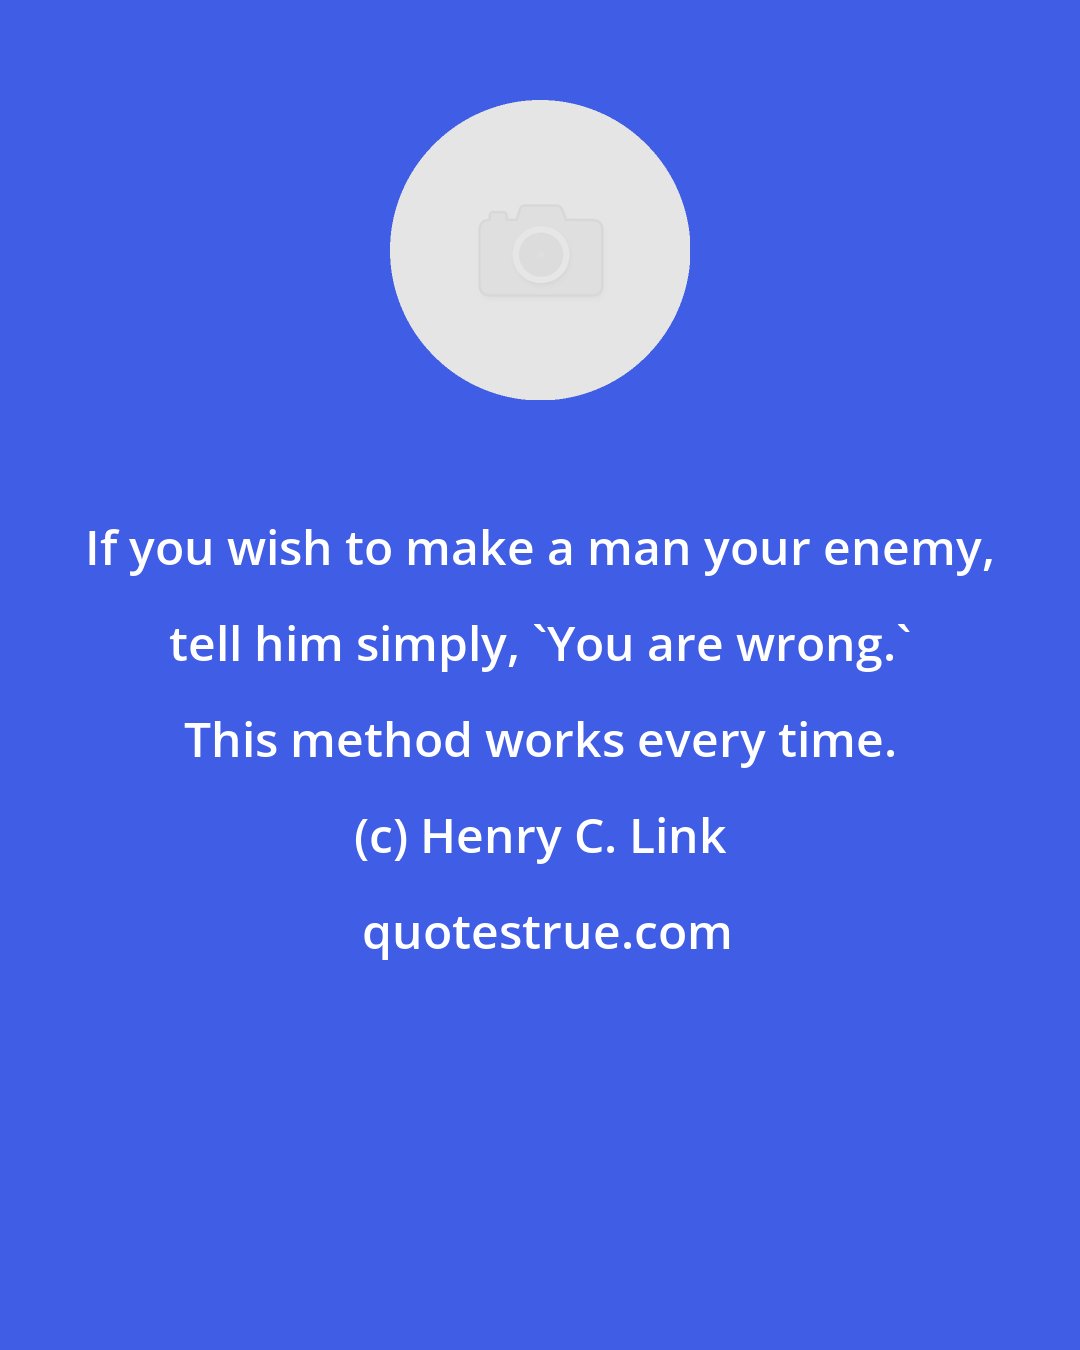 Henry C. Link: If you wish to make a man your enemy, tell him simply, 'You are wrong.' This method works every time.